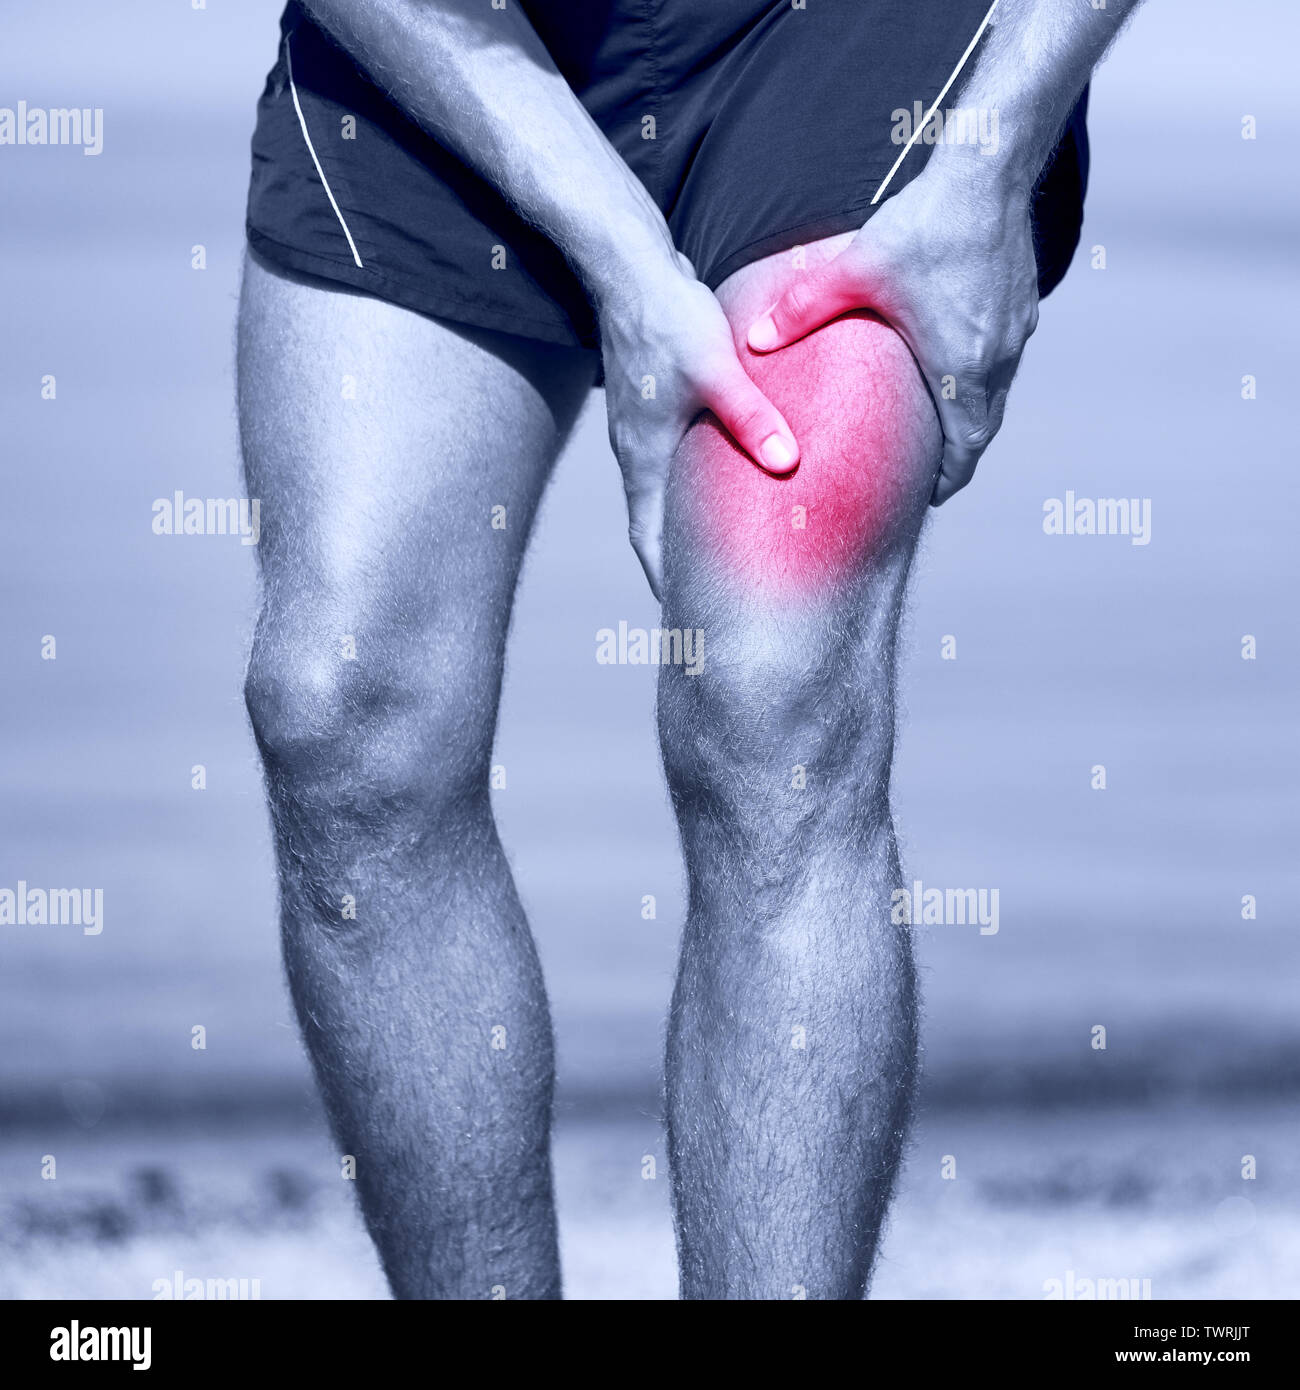 https://c8.alamy.com/comp/TWRJJT/muscle-sports-injury-of-male-runner-thigh-running-muscle-strain-injury-in-thigh-closeup-of-runner-touching-leg-in-muscle-pain-TWRJJT.jpg